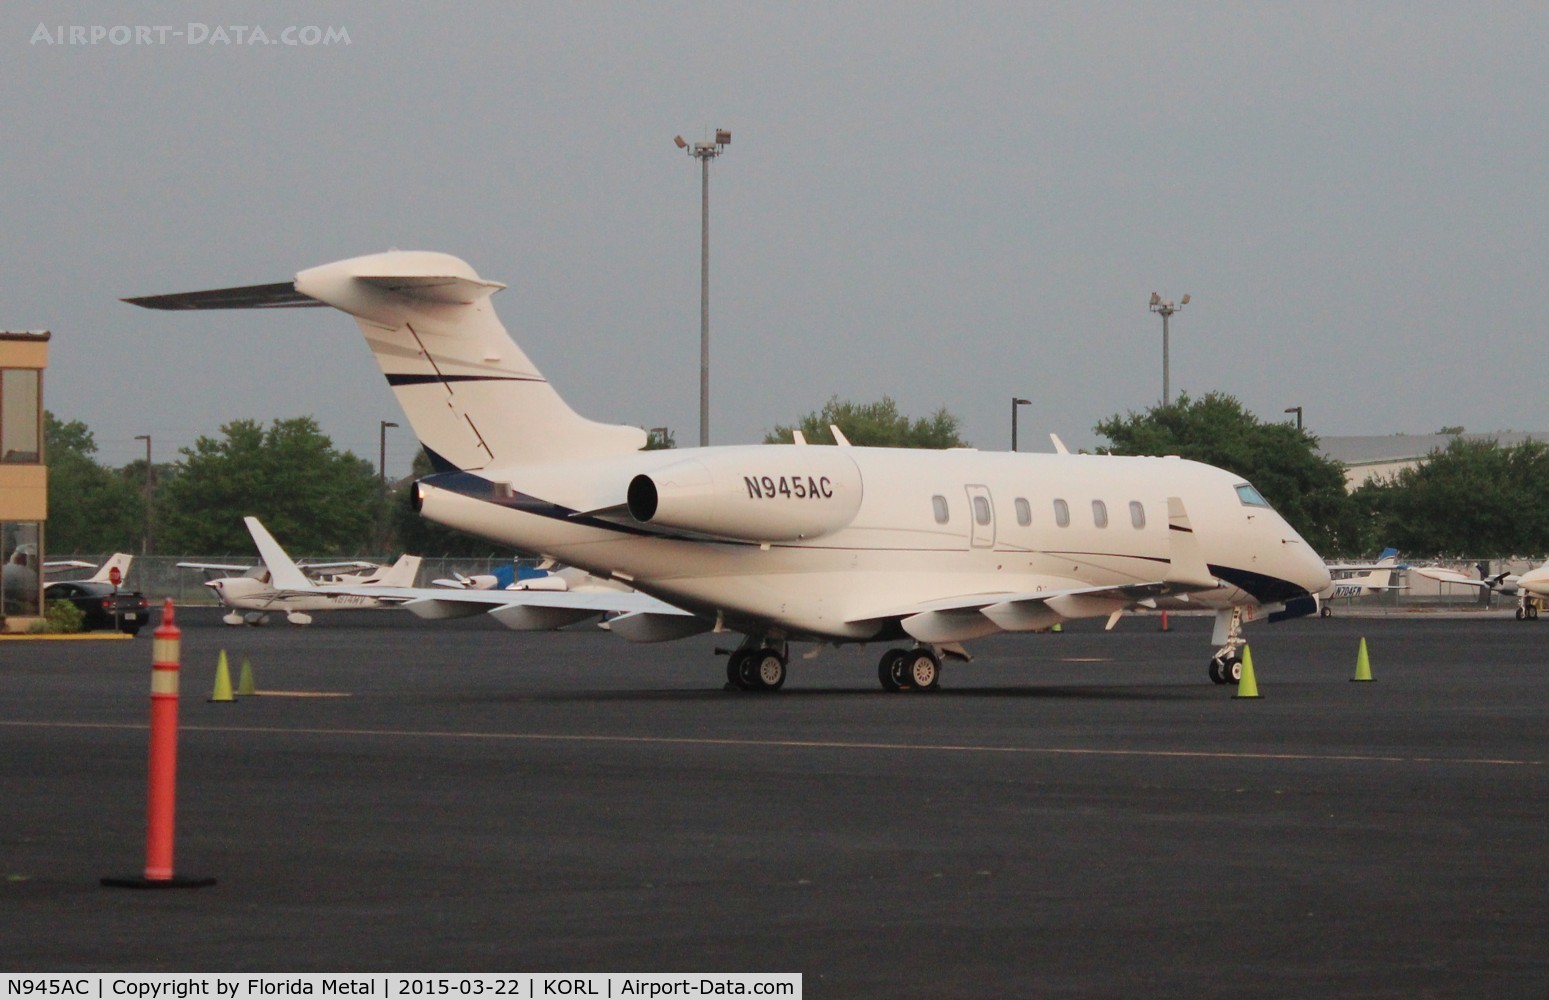 N945AC, 2013 Bombardier Challenger 300 (BD-100-1A10) C/N 20442, Challenger 300